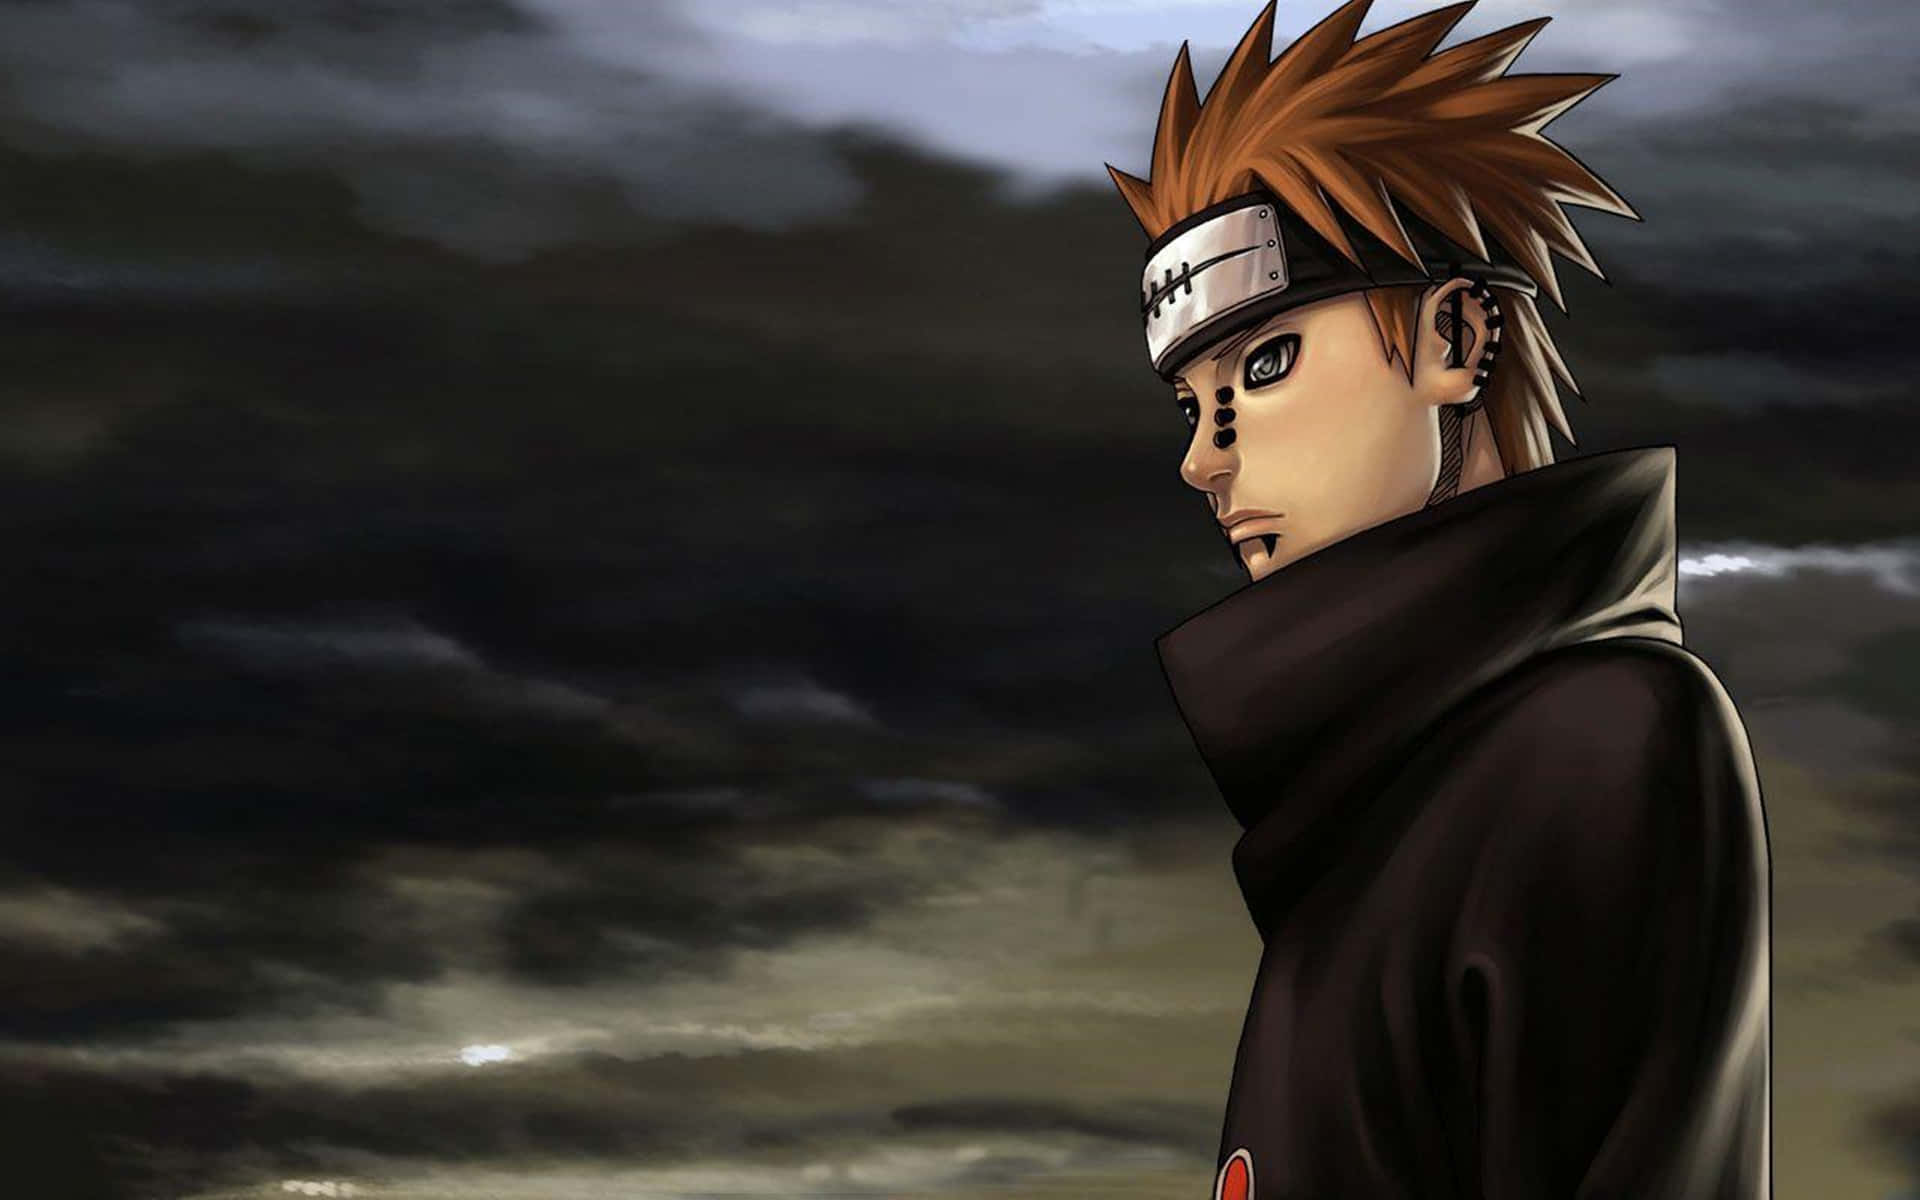 Naruto Confronts Pain In A Dramatic Moment Of Determination.